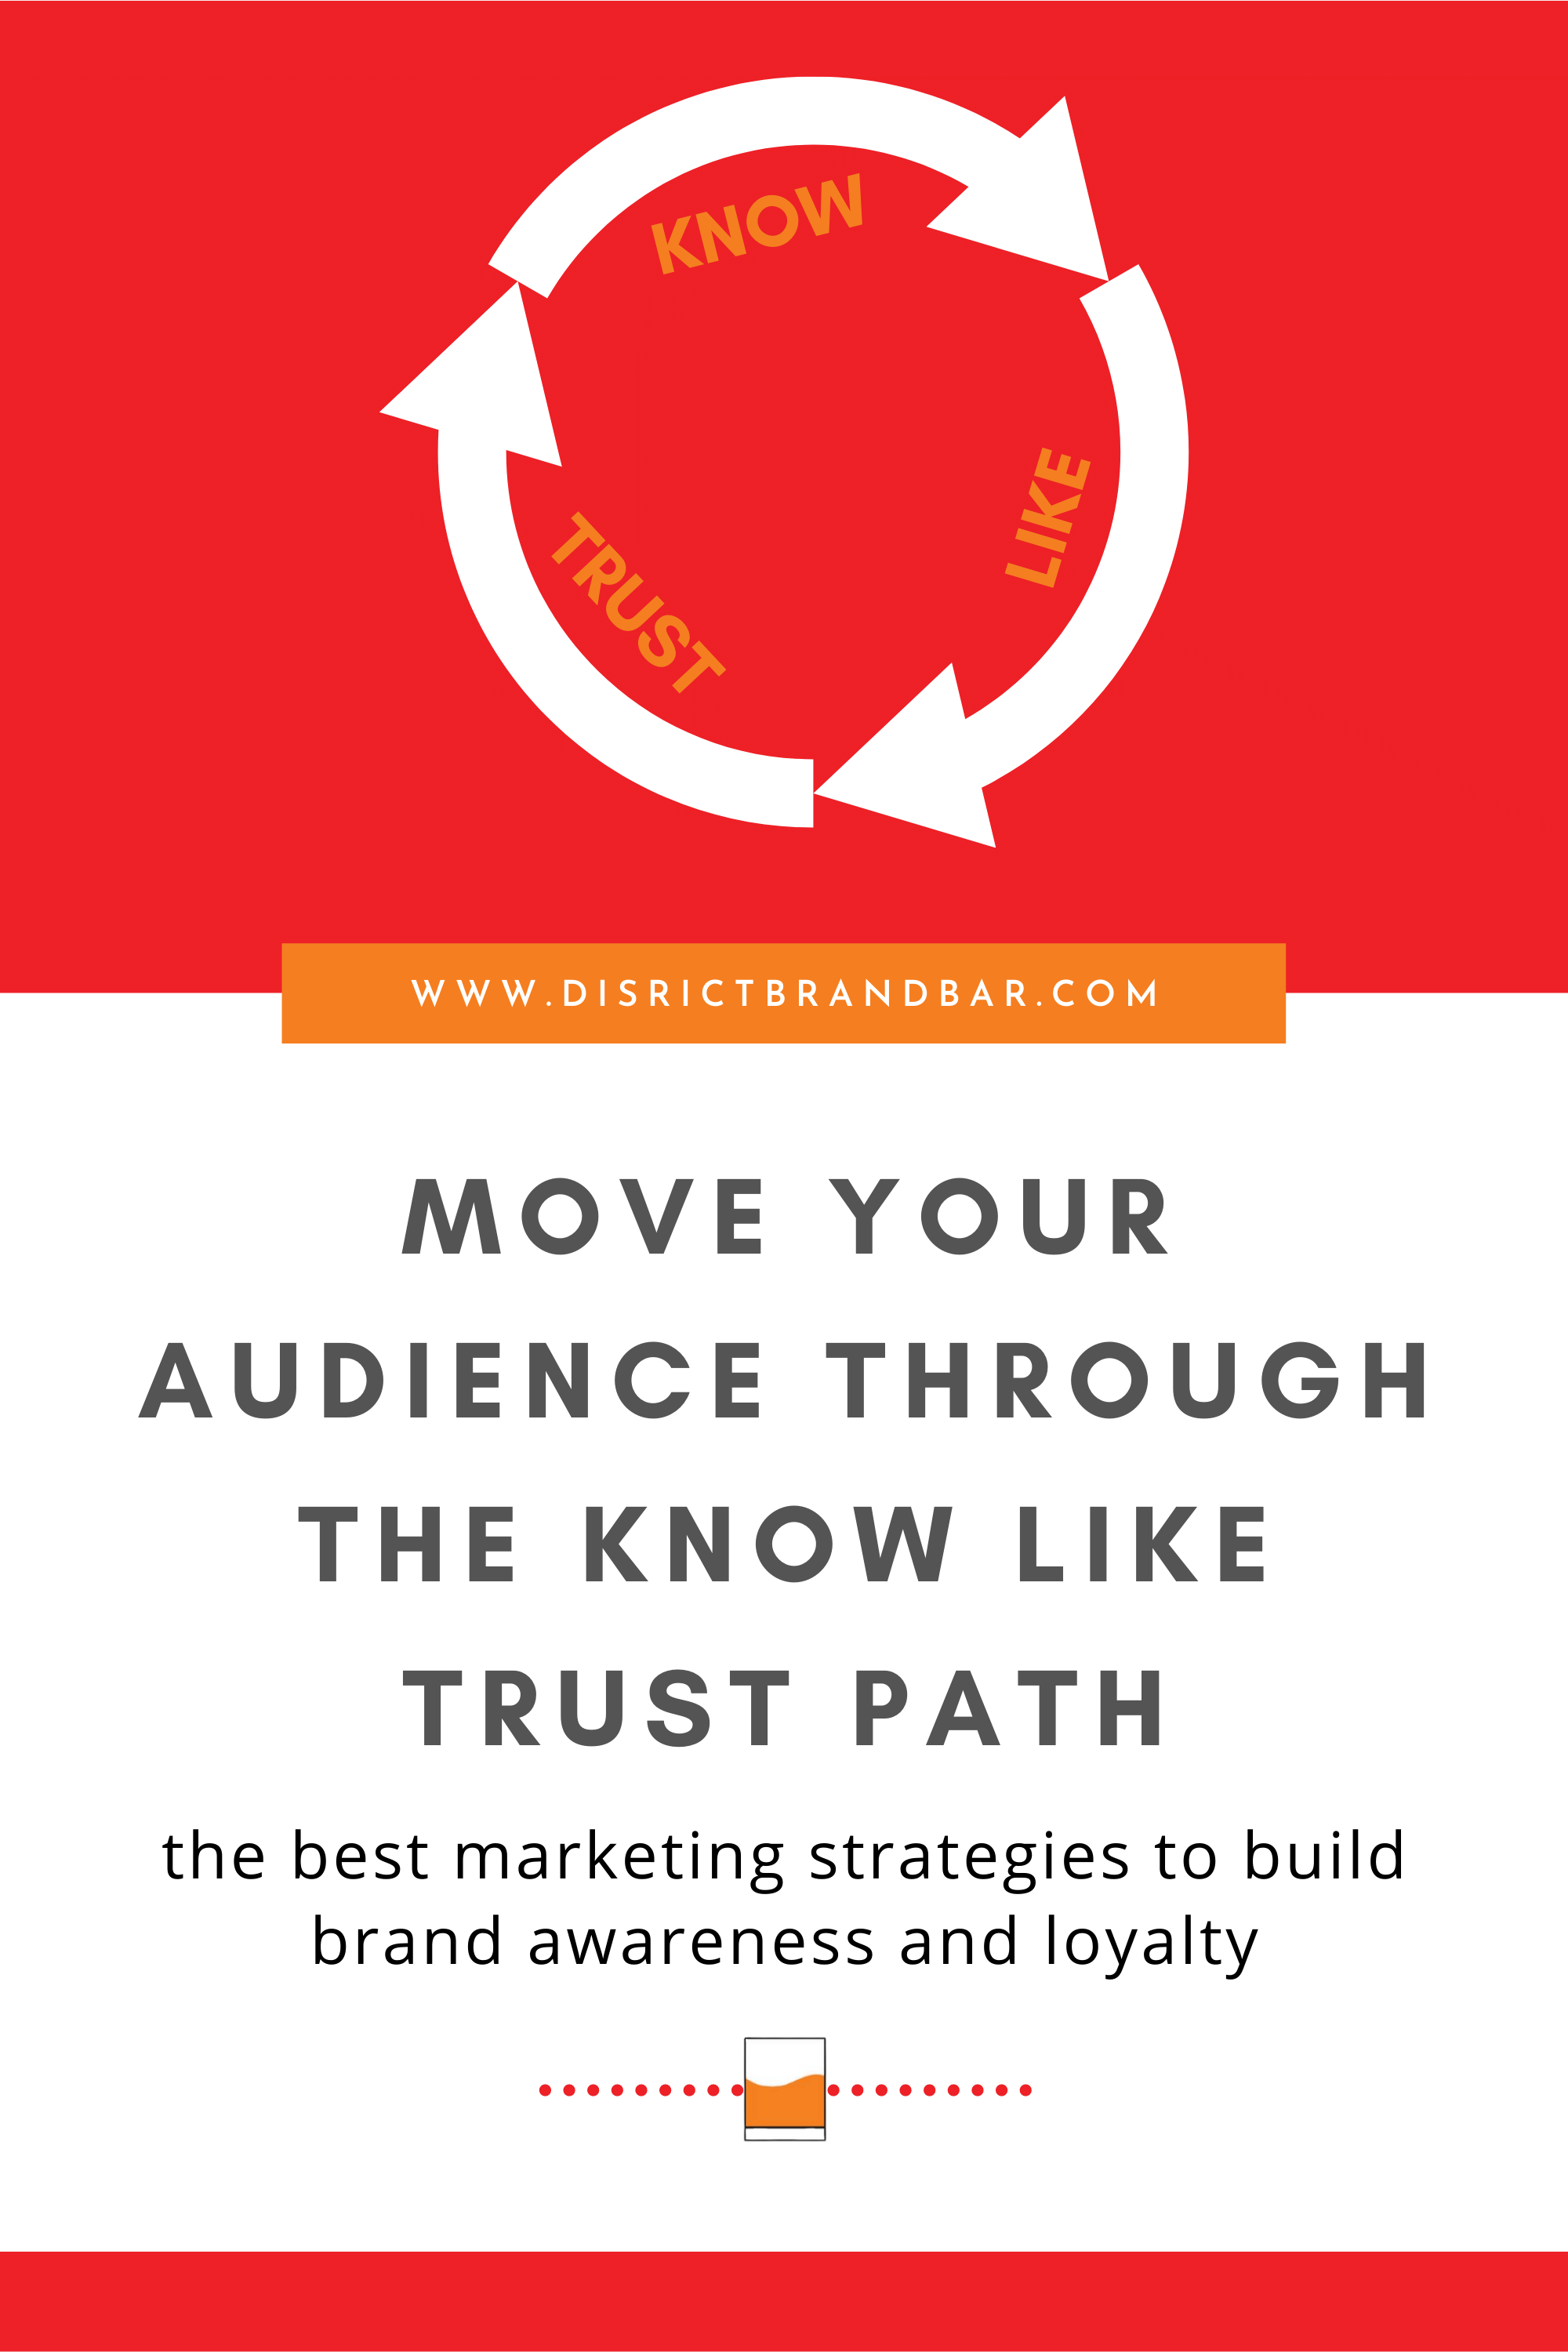 Move Your Audience Through the Know, Like, Trust Path